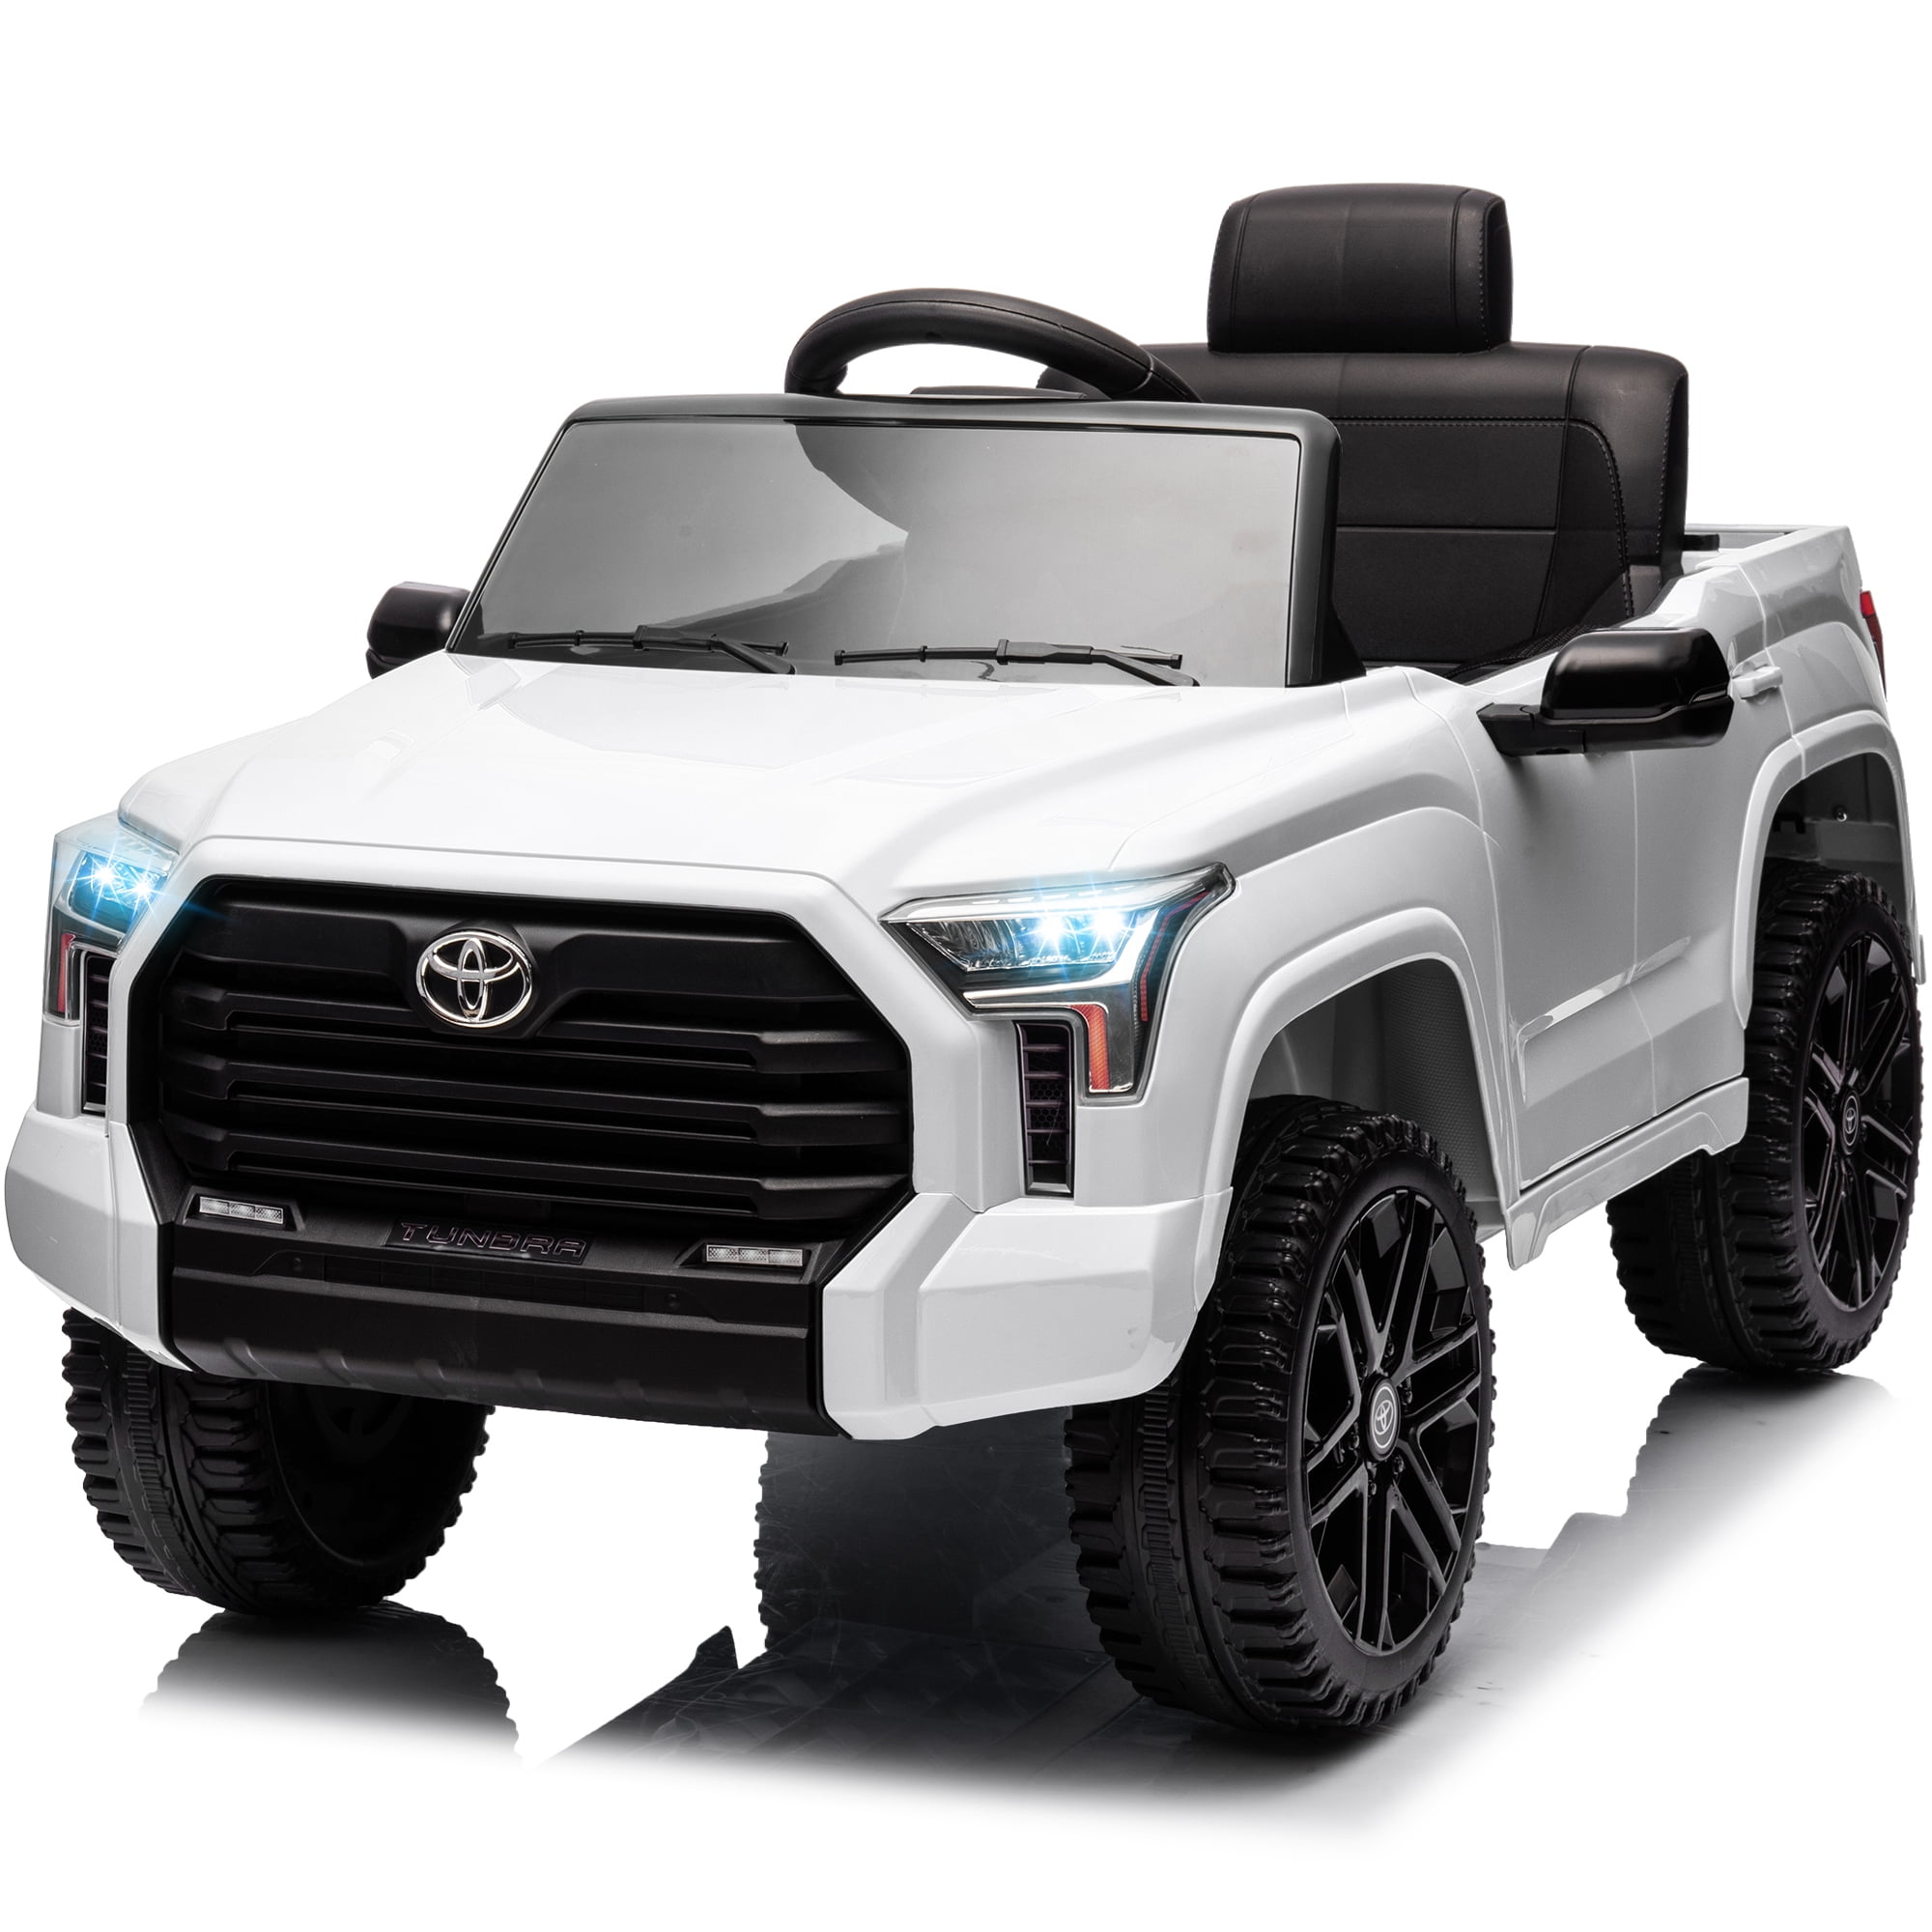 Toyota Tundra 12 V Battery Powered Ride on Cars Toys, Kids Electric ...